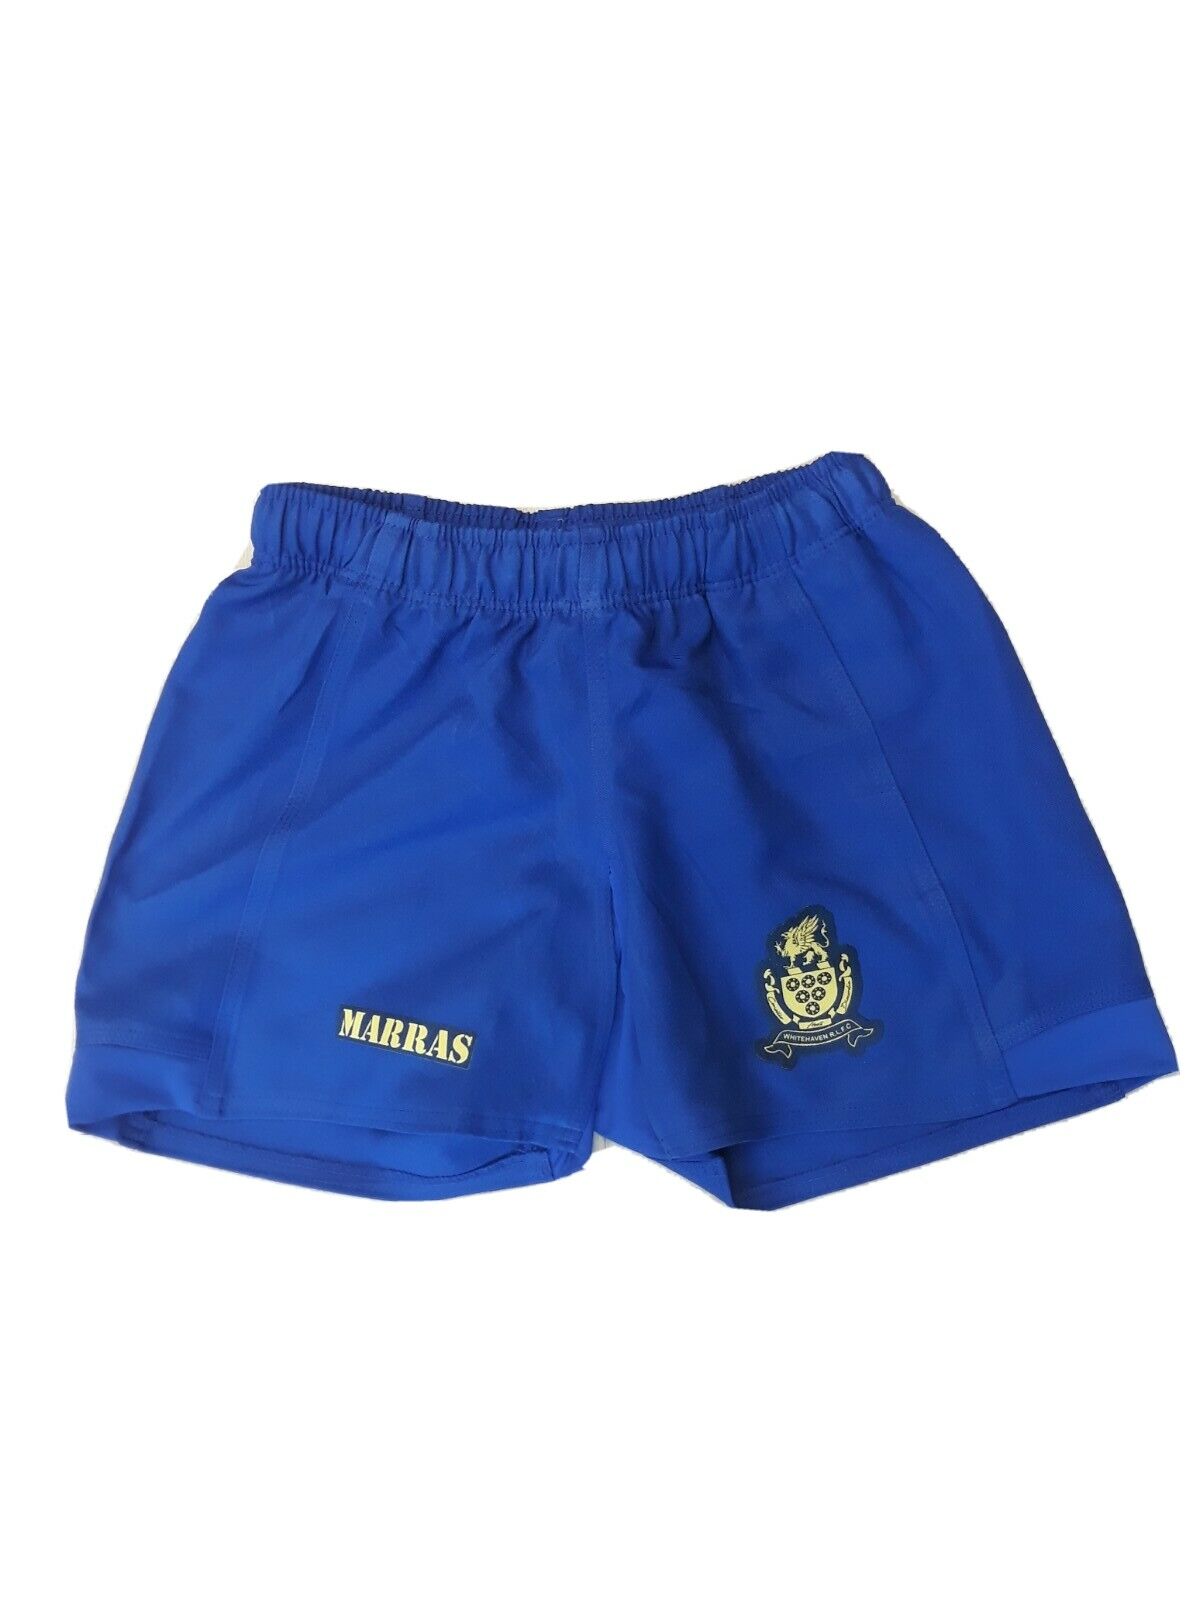 Whitehaven  Rugby League FC  Replica  Shorts